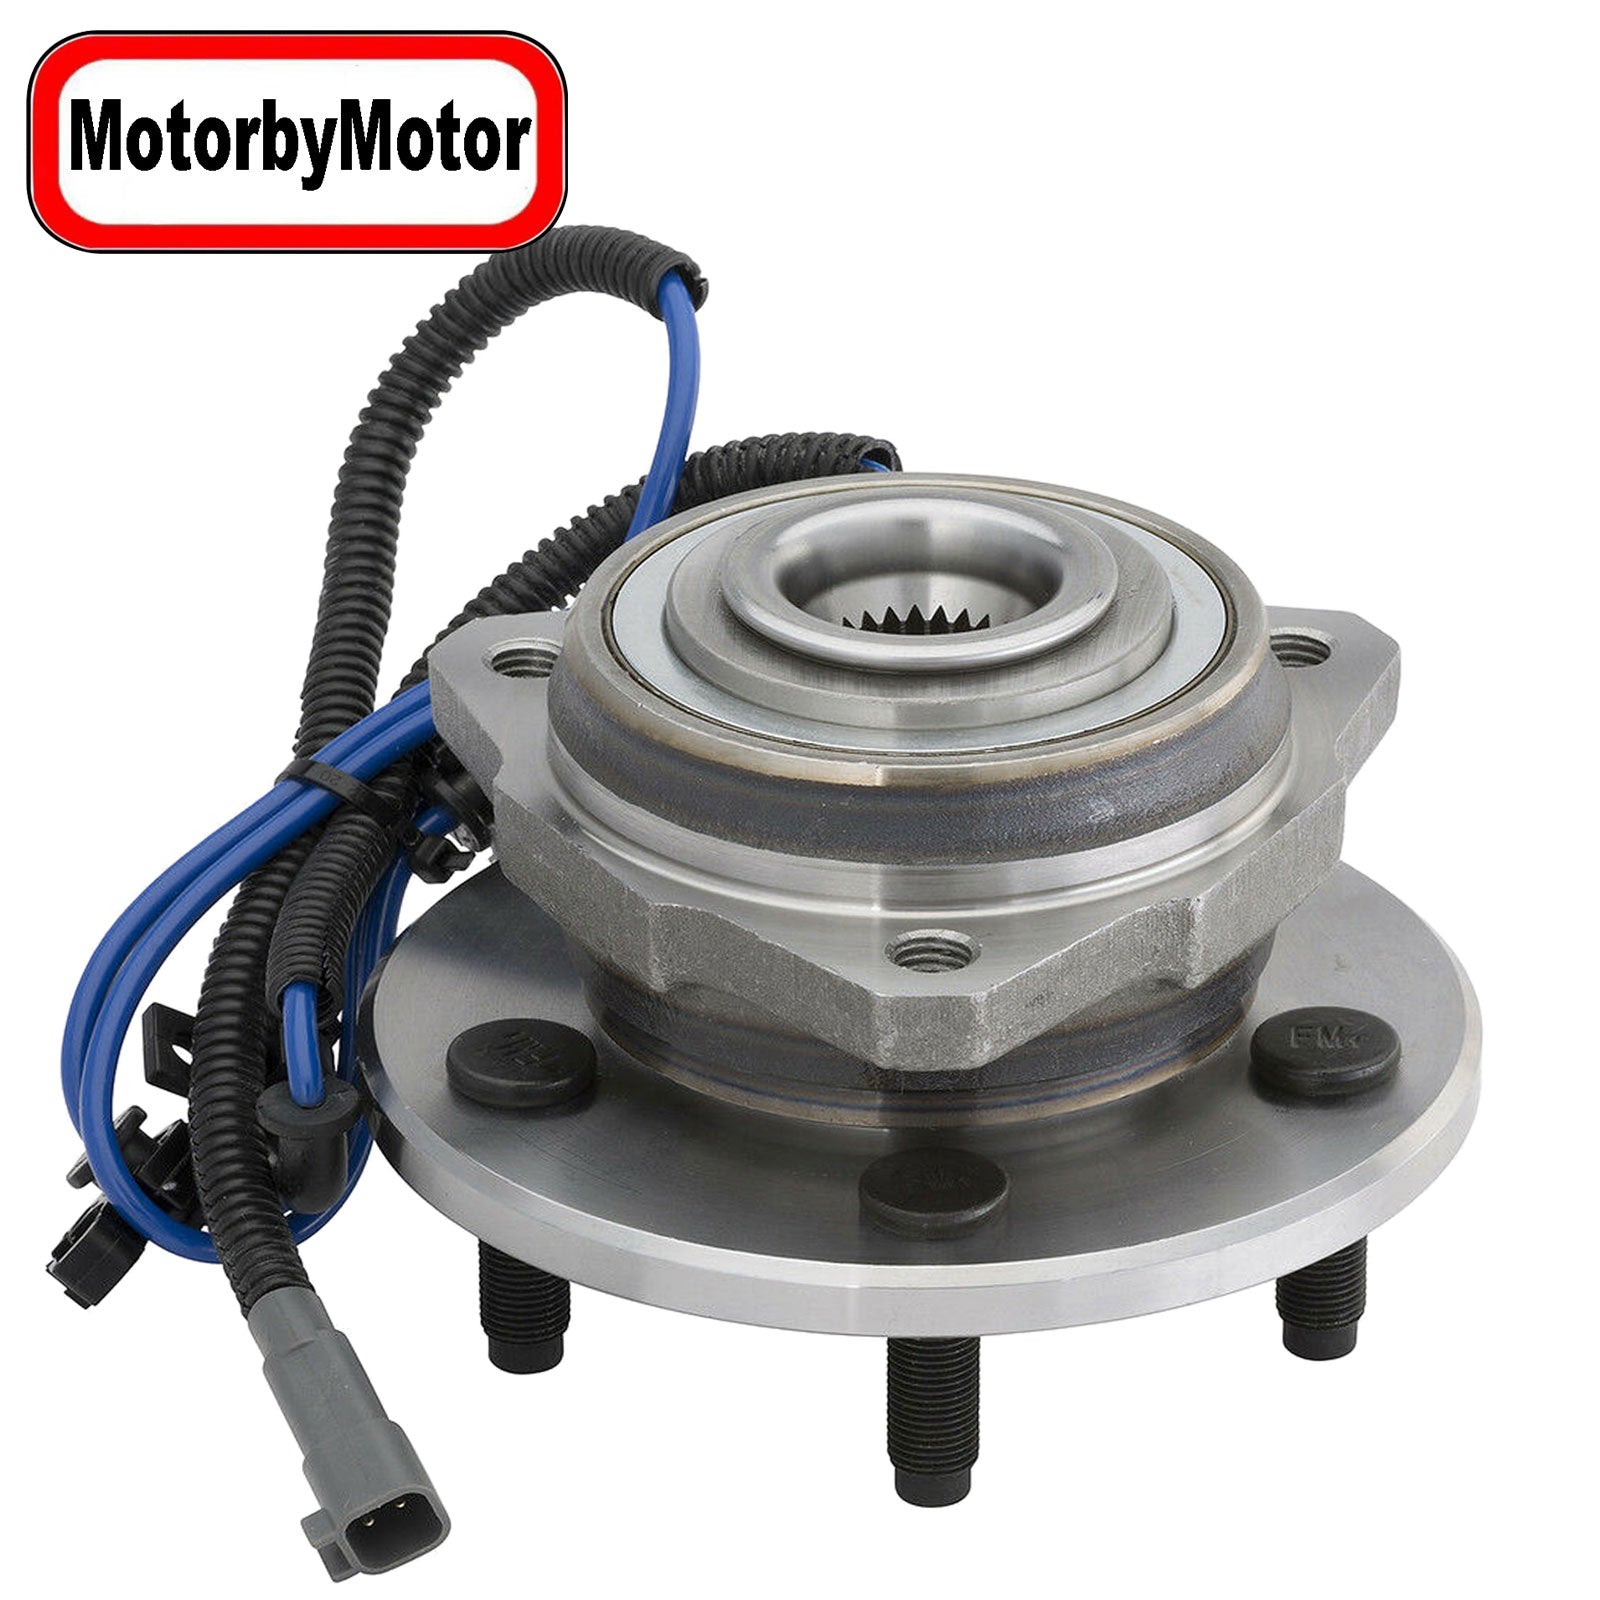 MotorbyMotor 513176 Front Left Heavy Duty Wheel Bearing Assembly with 5 Lugs Fits for 2002-2007 Jeep Liberty Wheel Bearing and Hub Assembly (w/ABS, All Models)-Driver Side MotorbyMotor